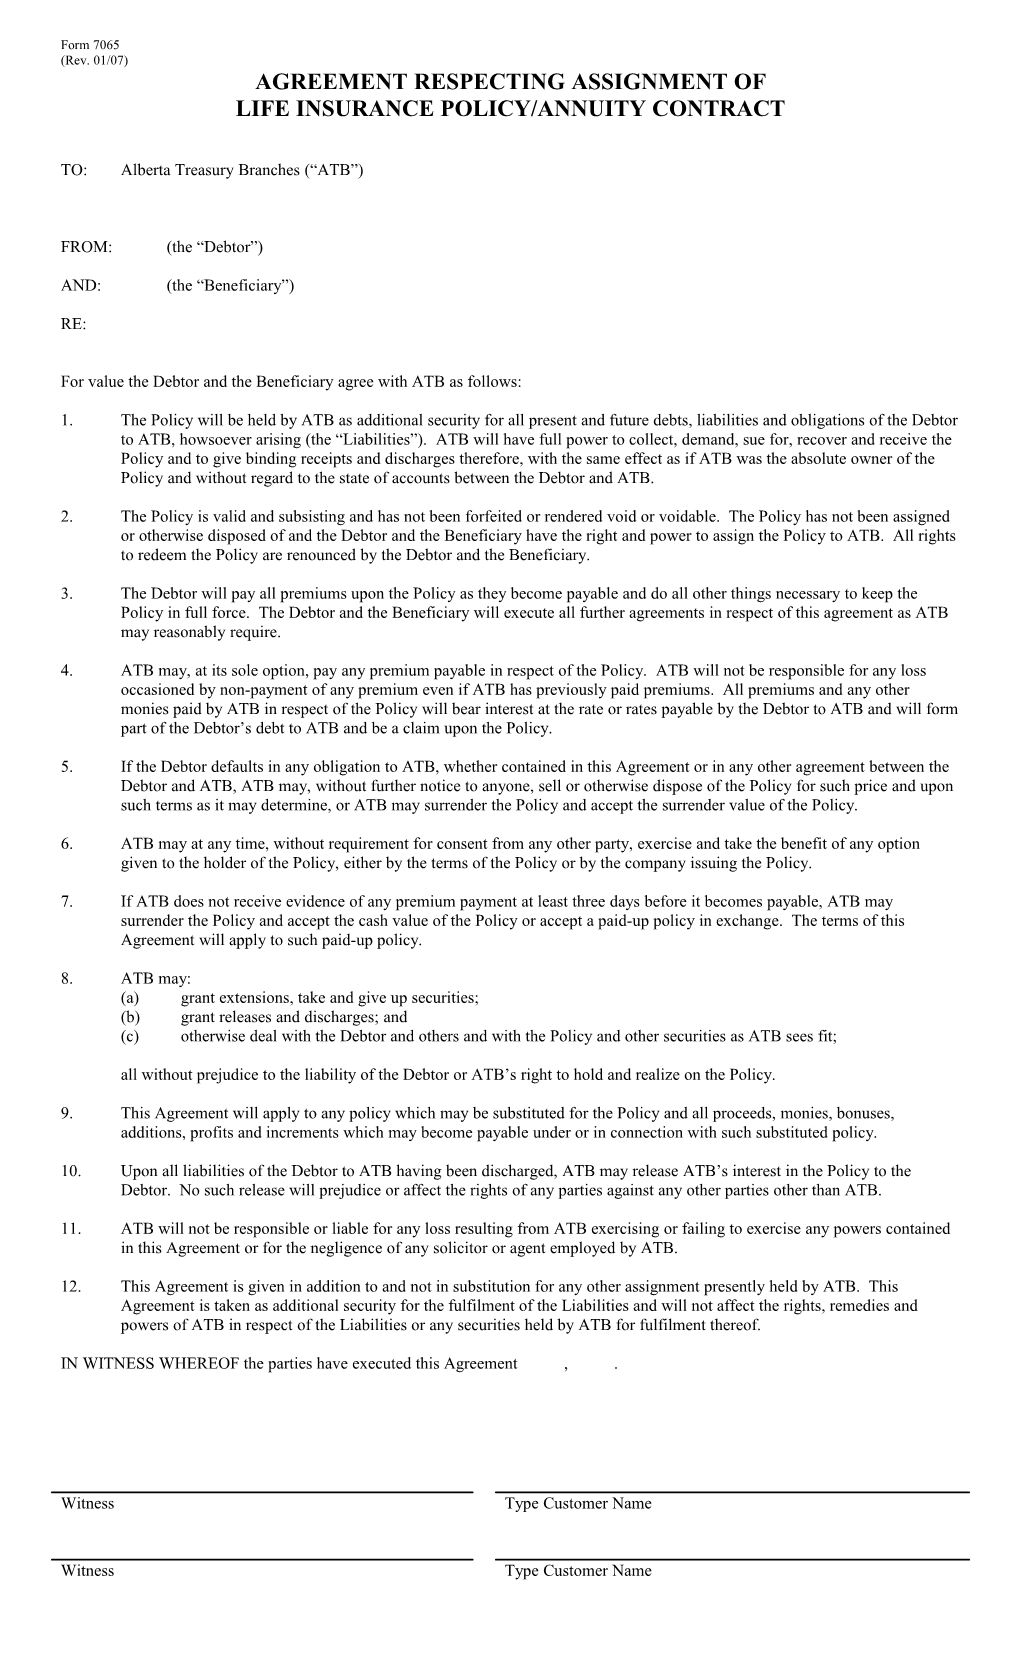 7065 - Agreement Respecting Assignment of Life Insurance Policy Annuity Contract